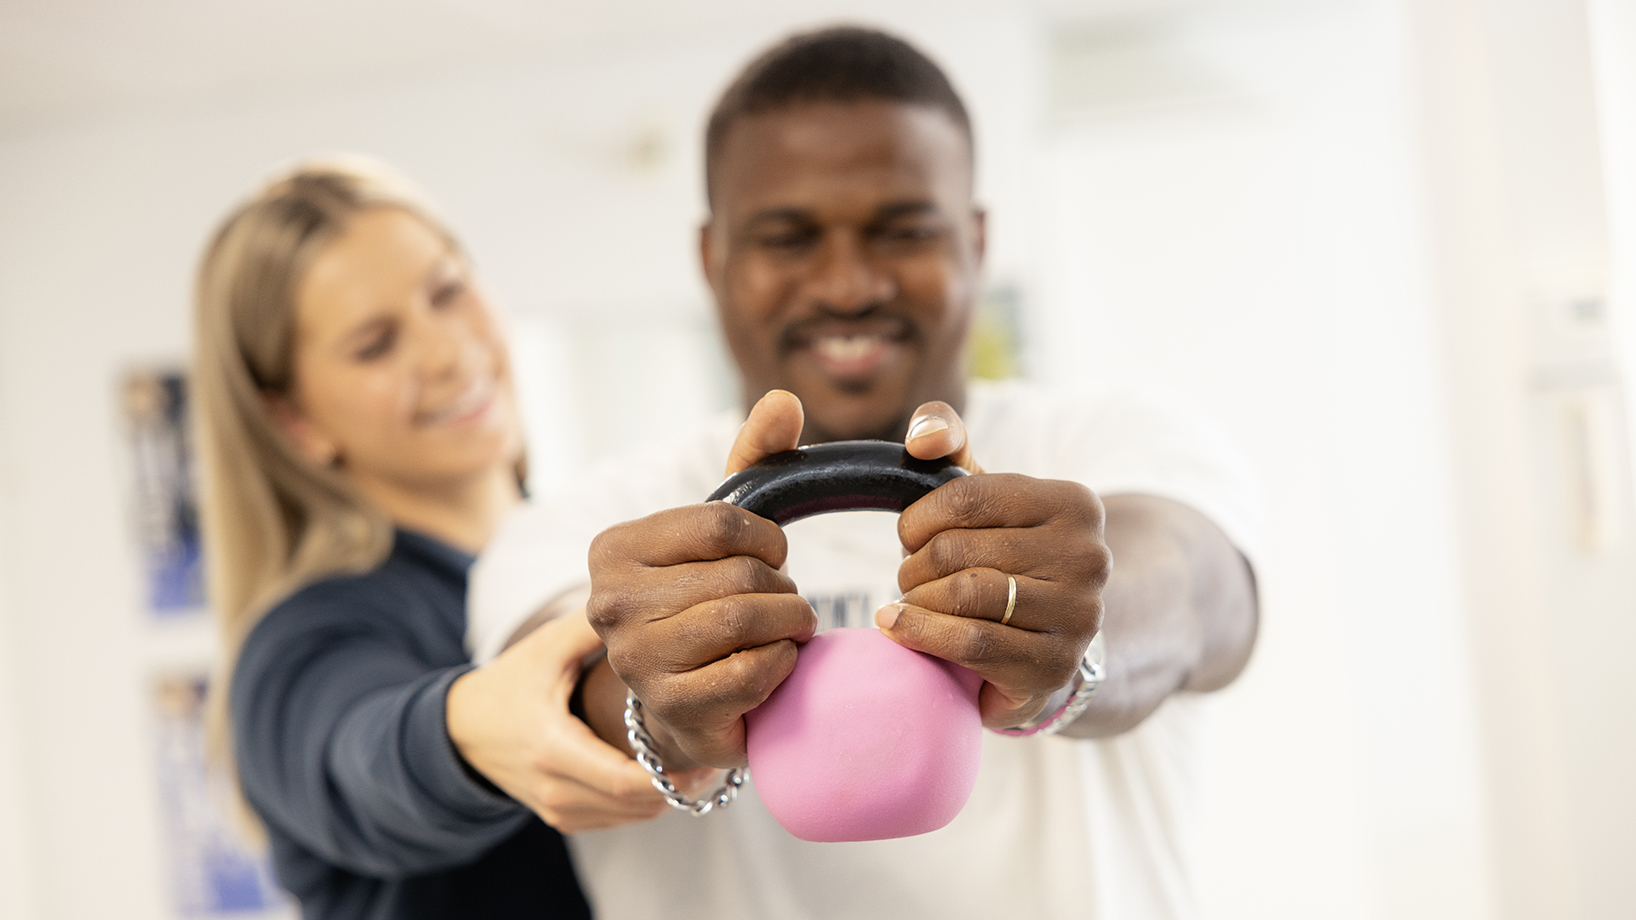 a pink kettle bell, held by hands of two smiling people out of focus at the backround